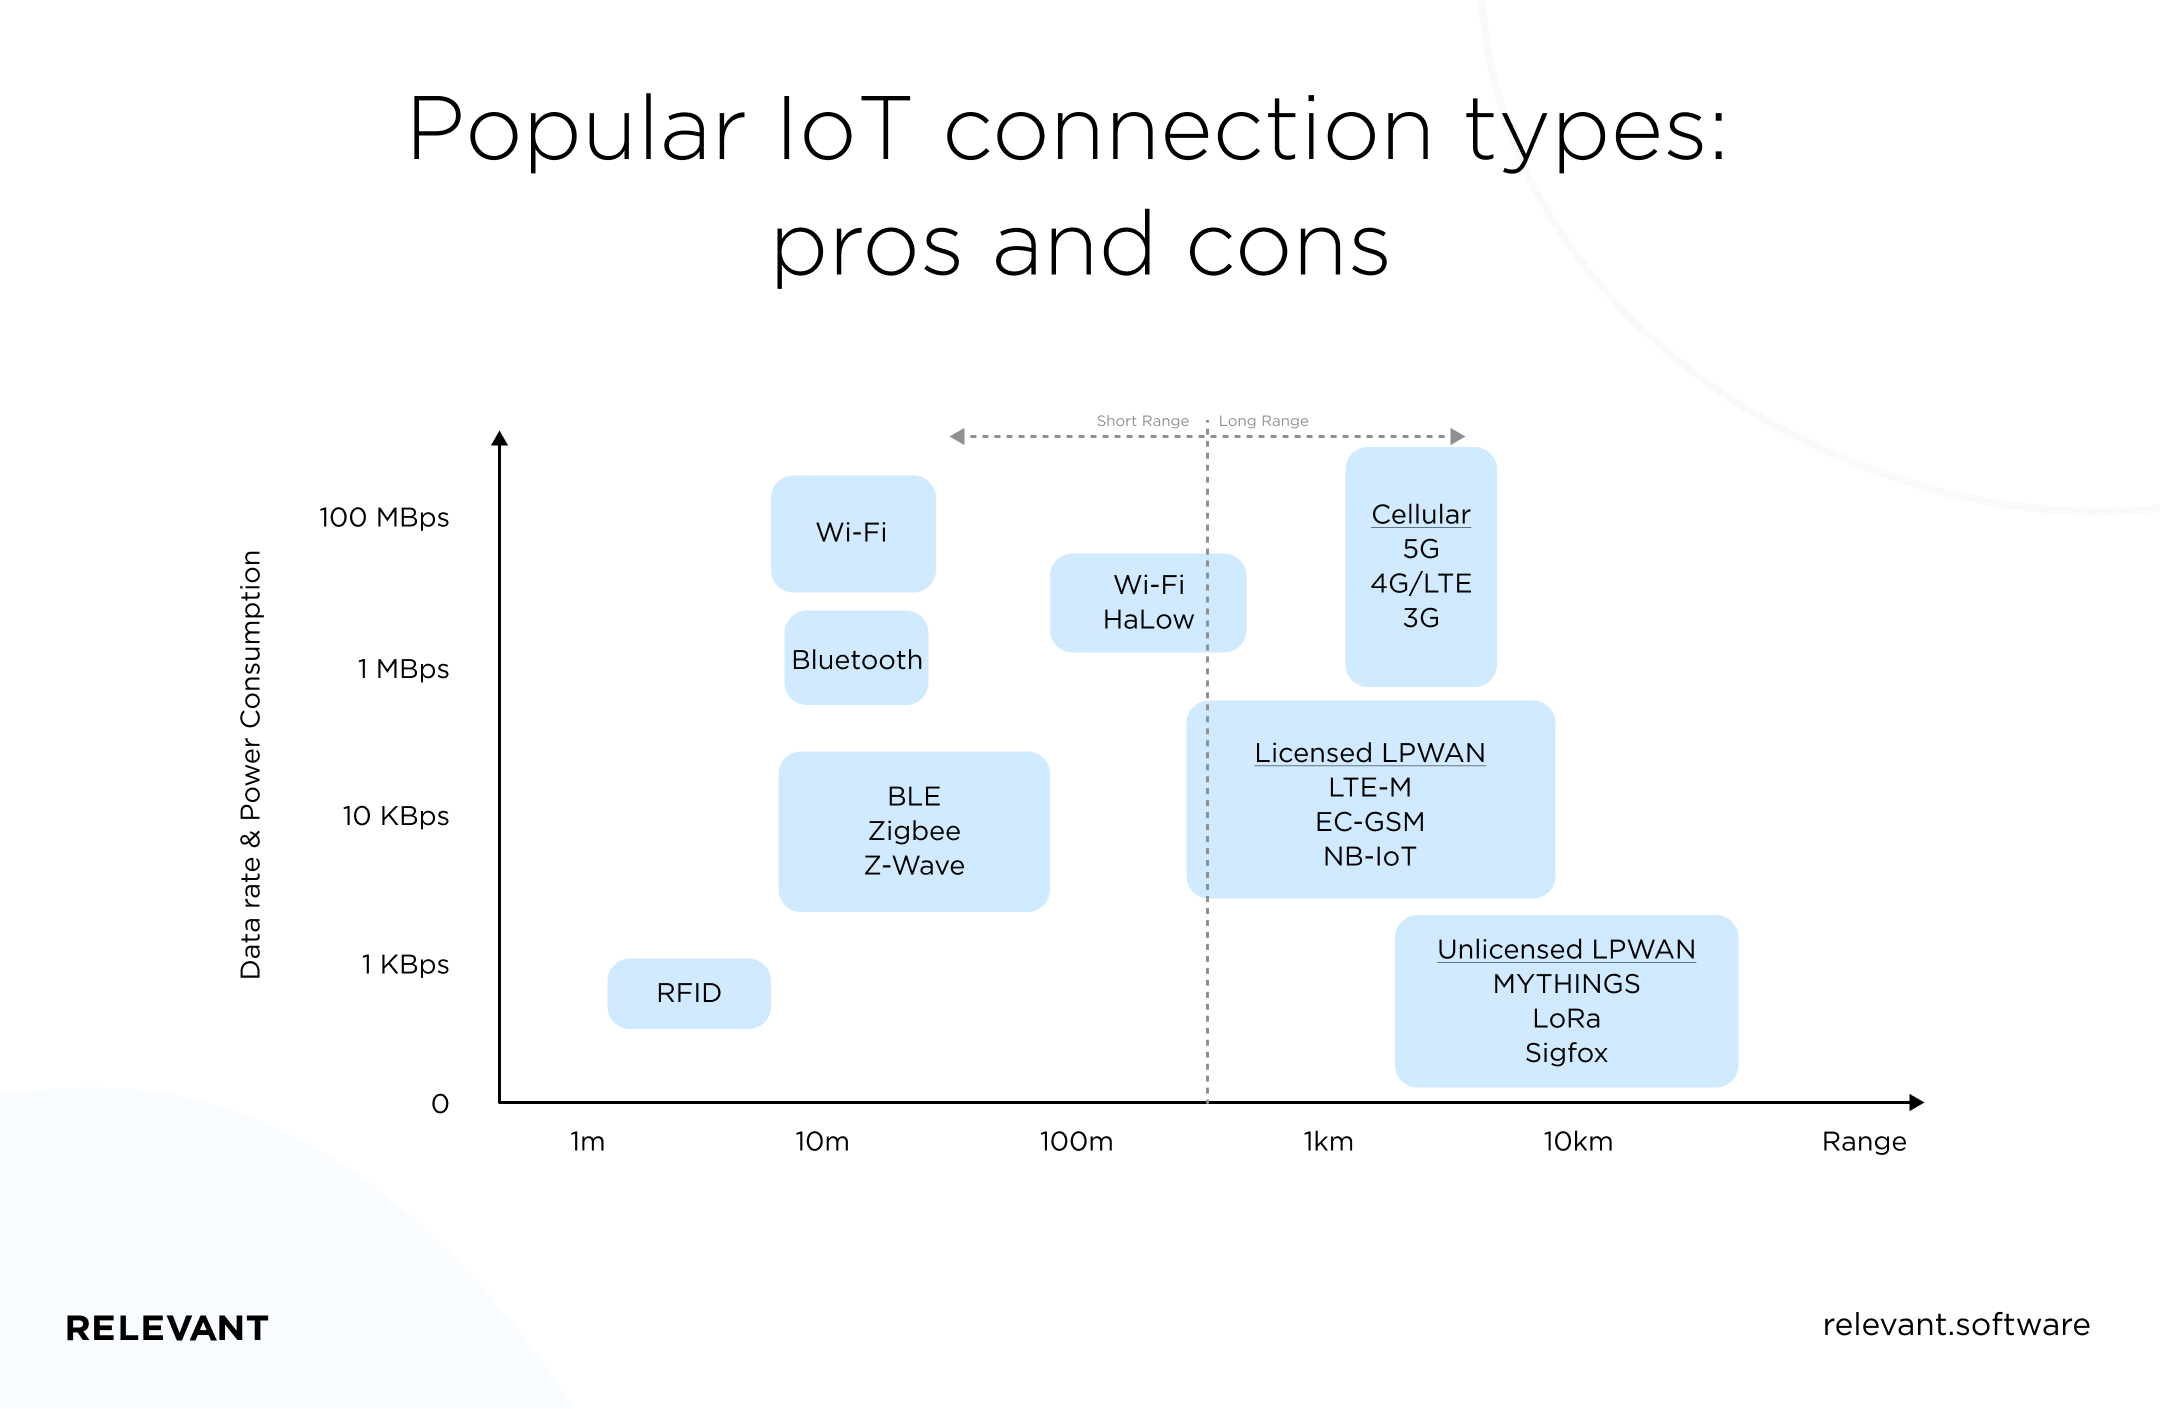 Popular IoT connection types: pros and cons